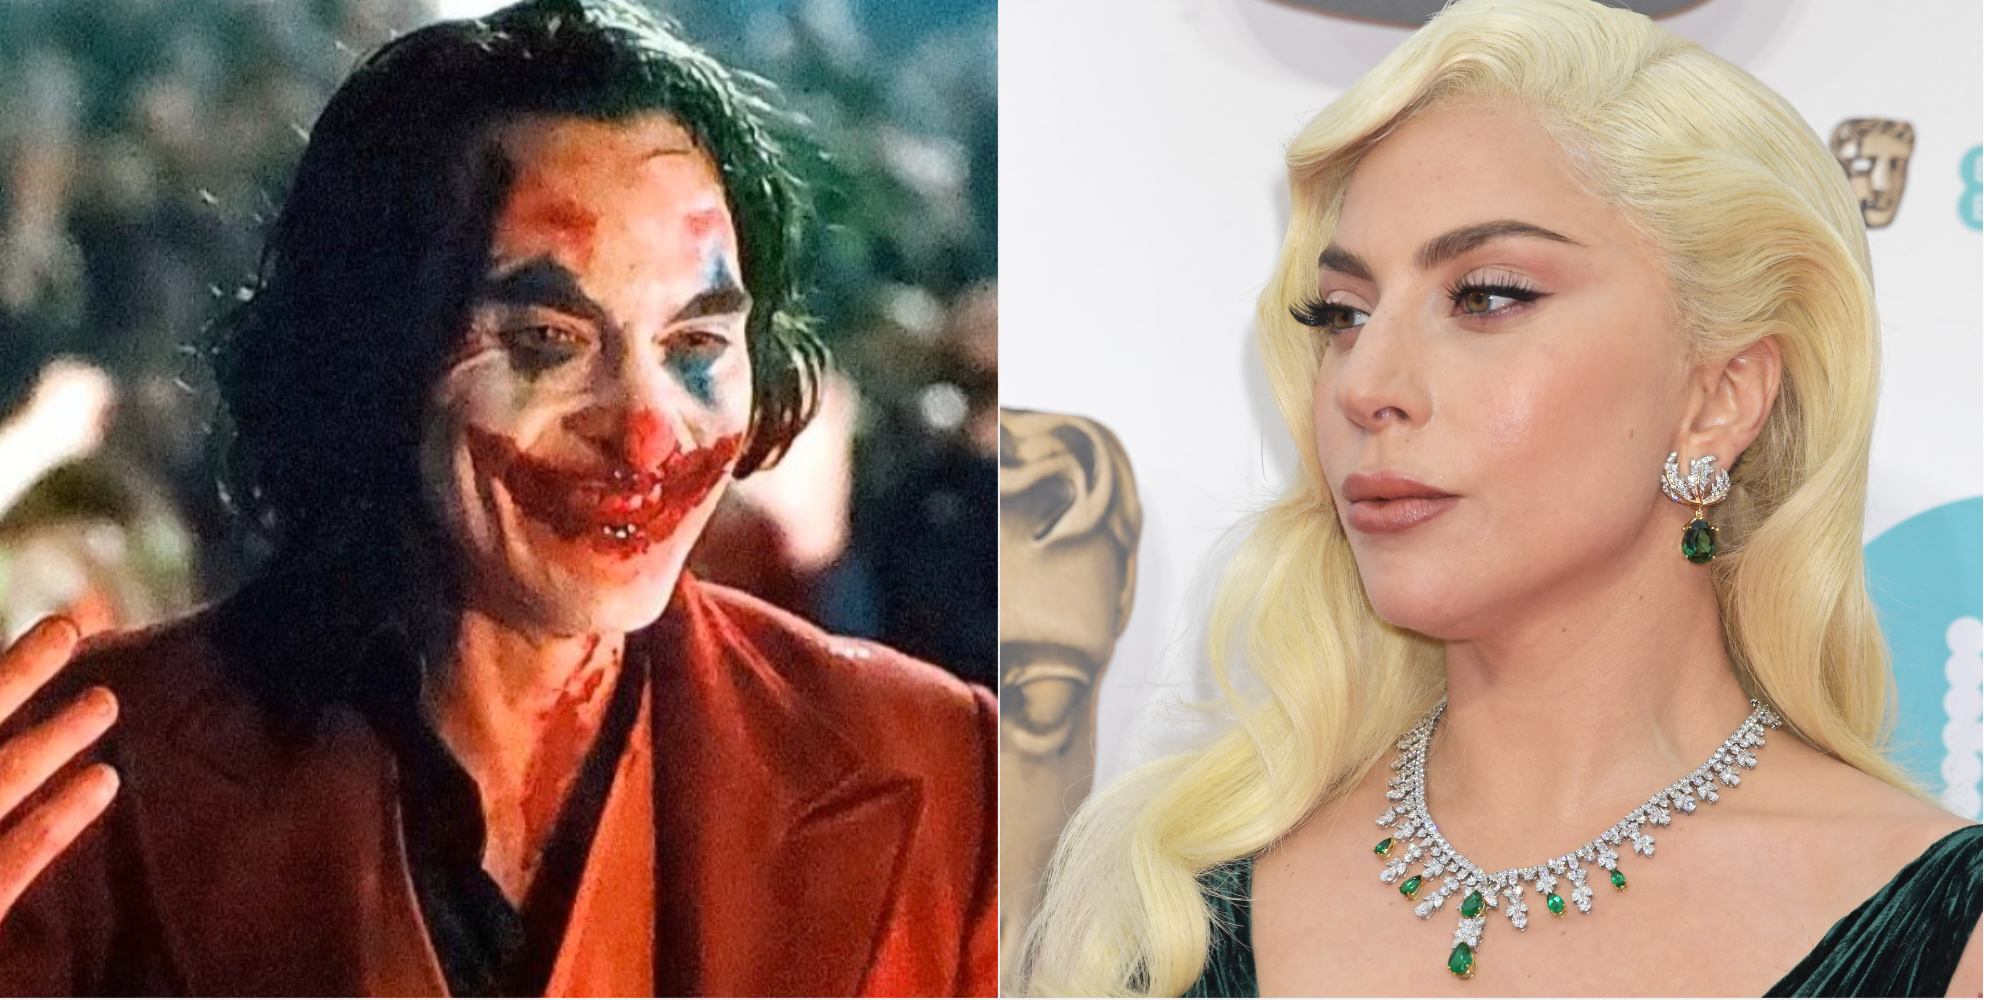 Joaquin Phoenix as the Joker and Lady Gaga at an awards event in side by side photographs.